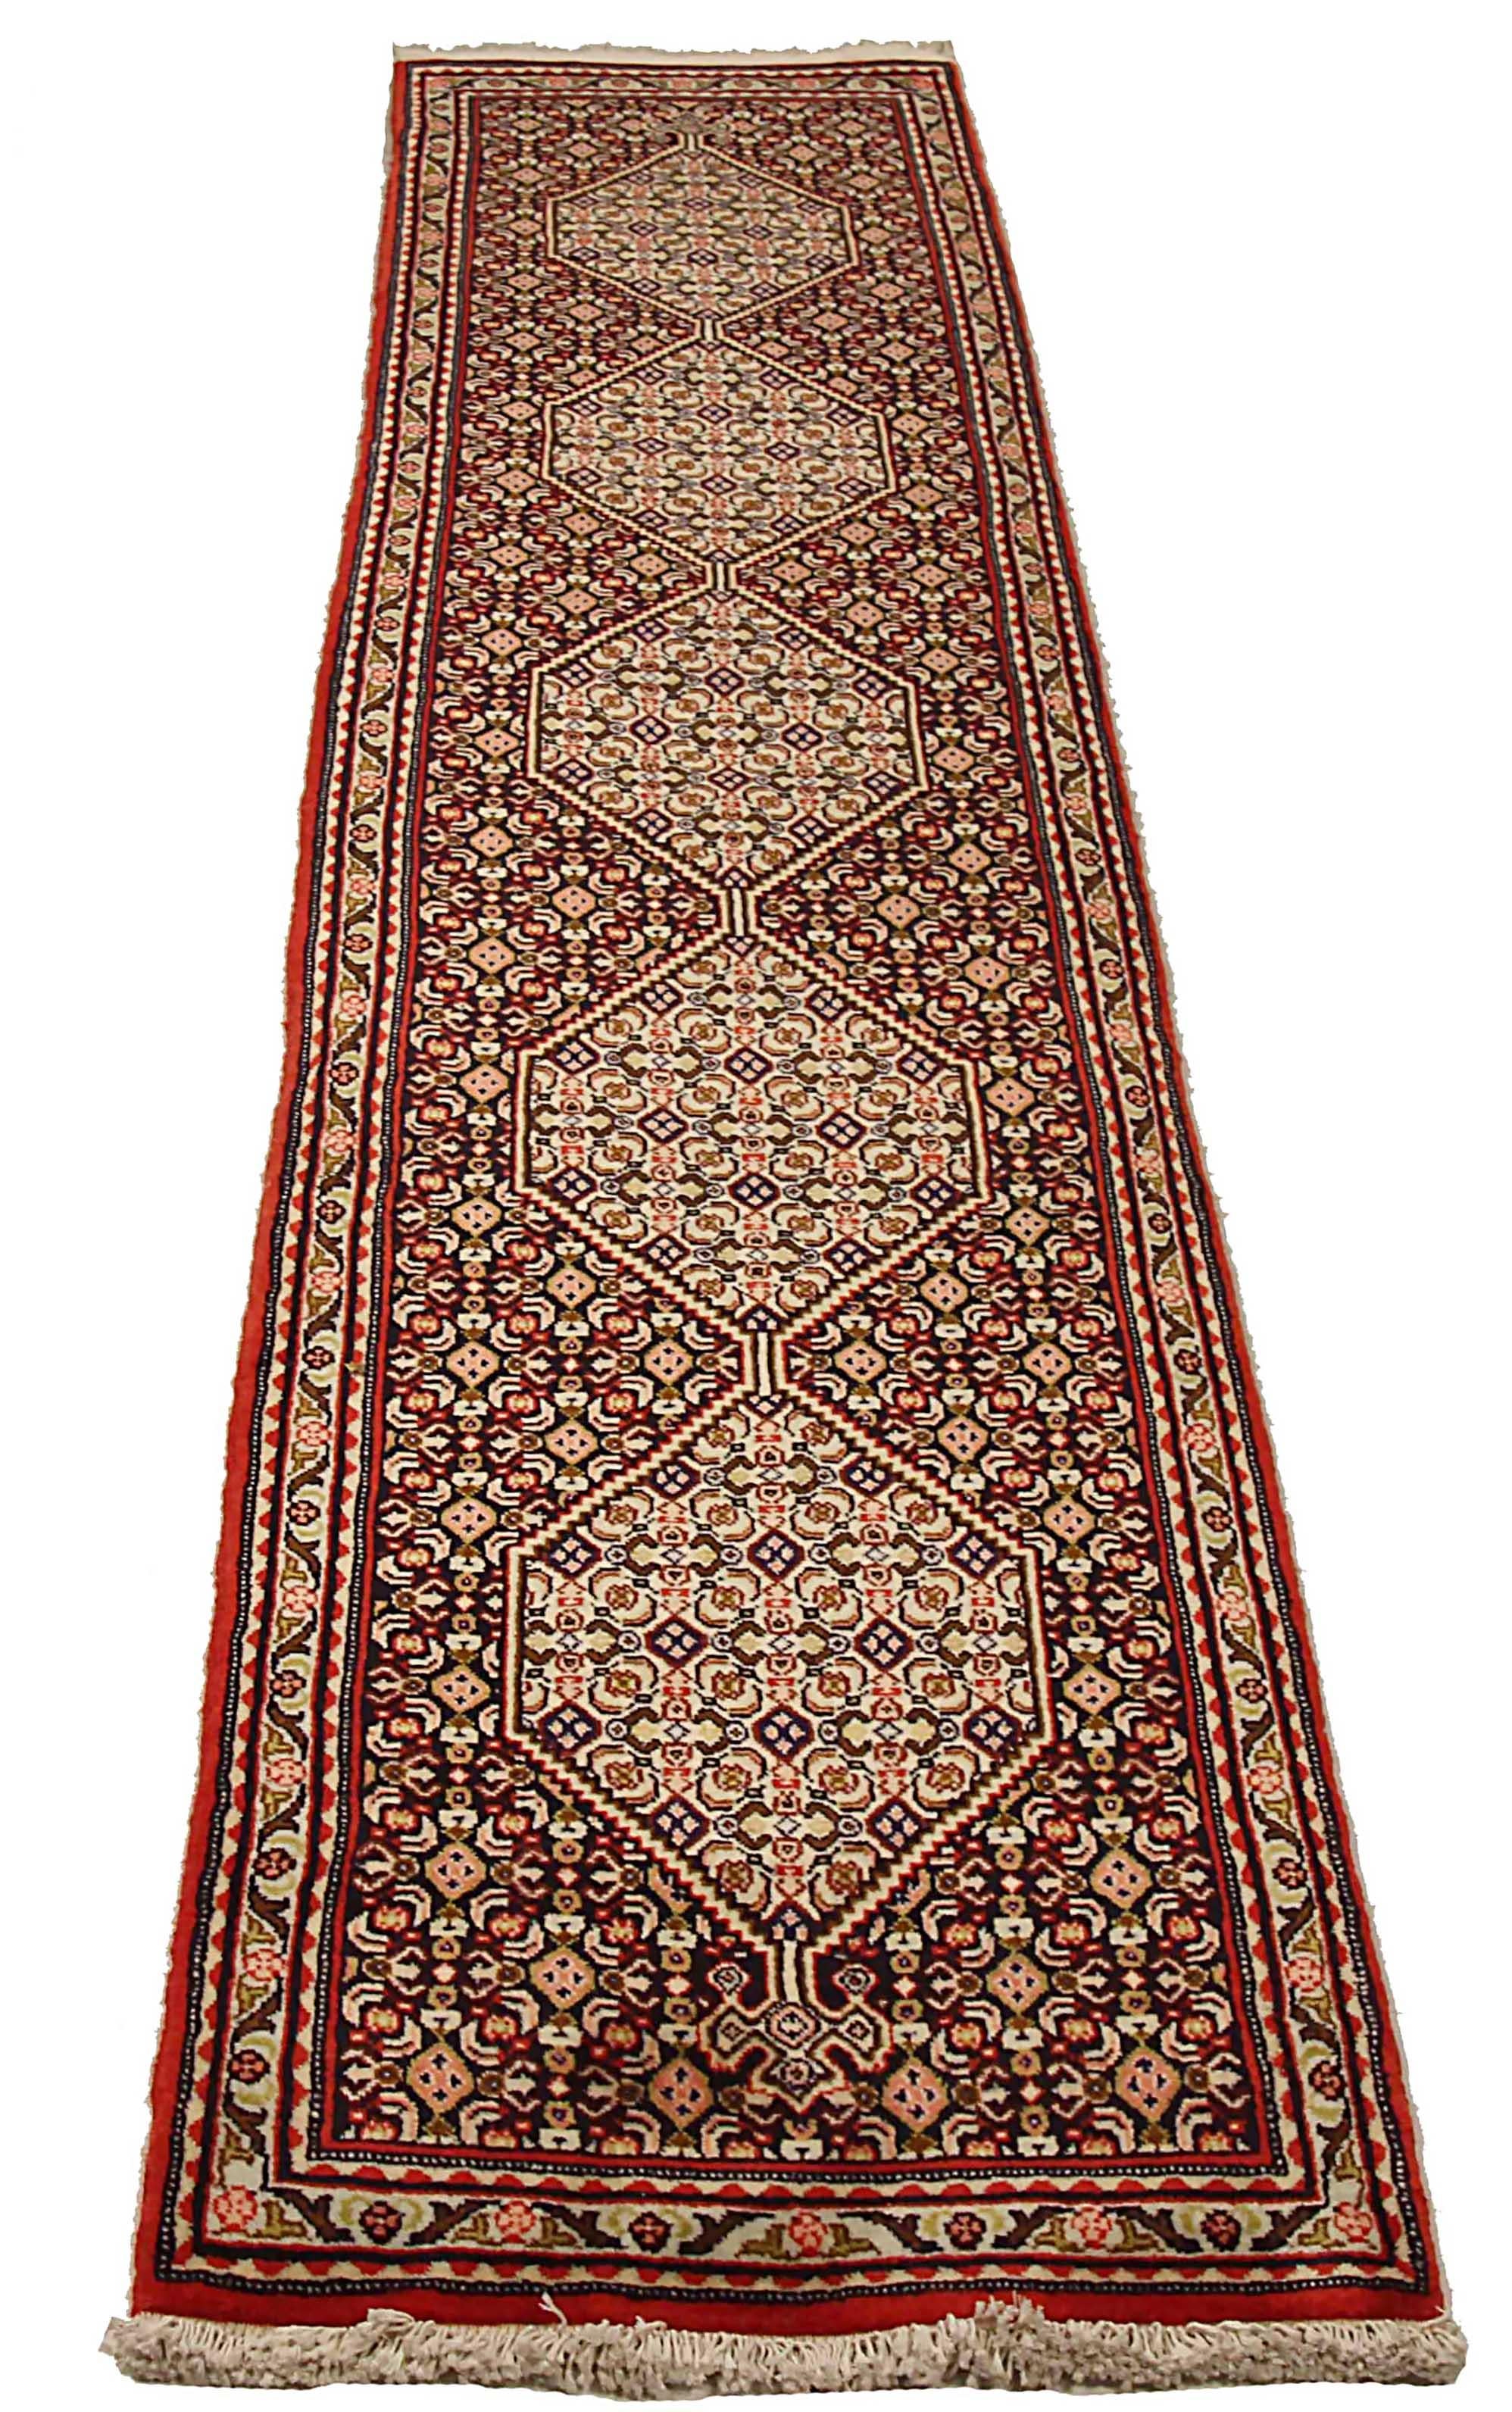 Antique Persian runner rug handwoven from the finest sheep’s wool. It’s colored with all-natural vegetable dyes that are safe for humans and pets. It’s a traditional Kurdish design handwoven by expert artisans. It’s a lovely runner rug that can be